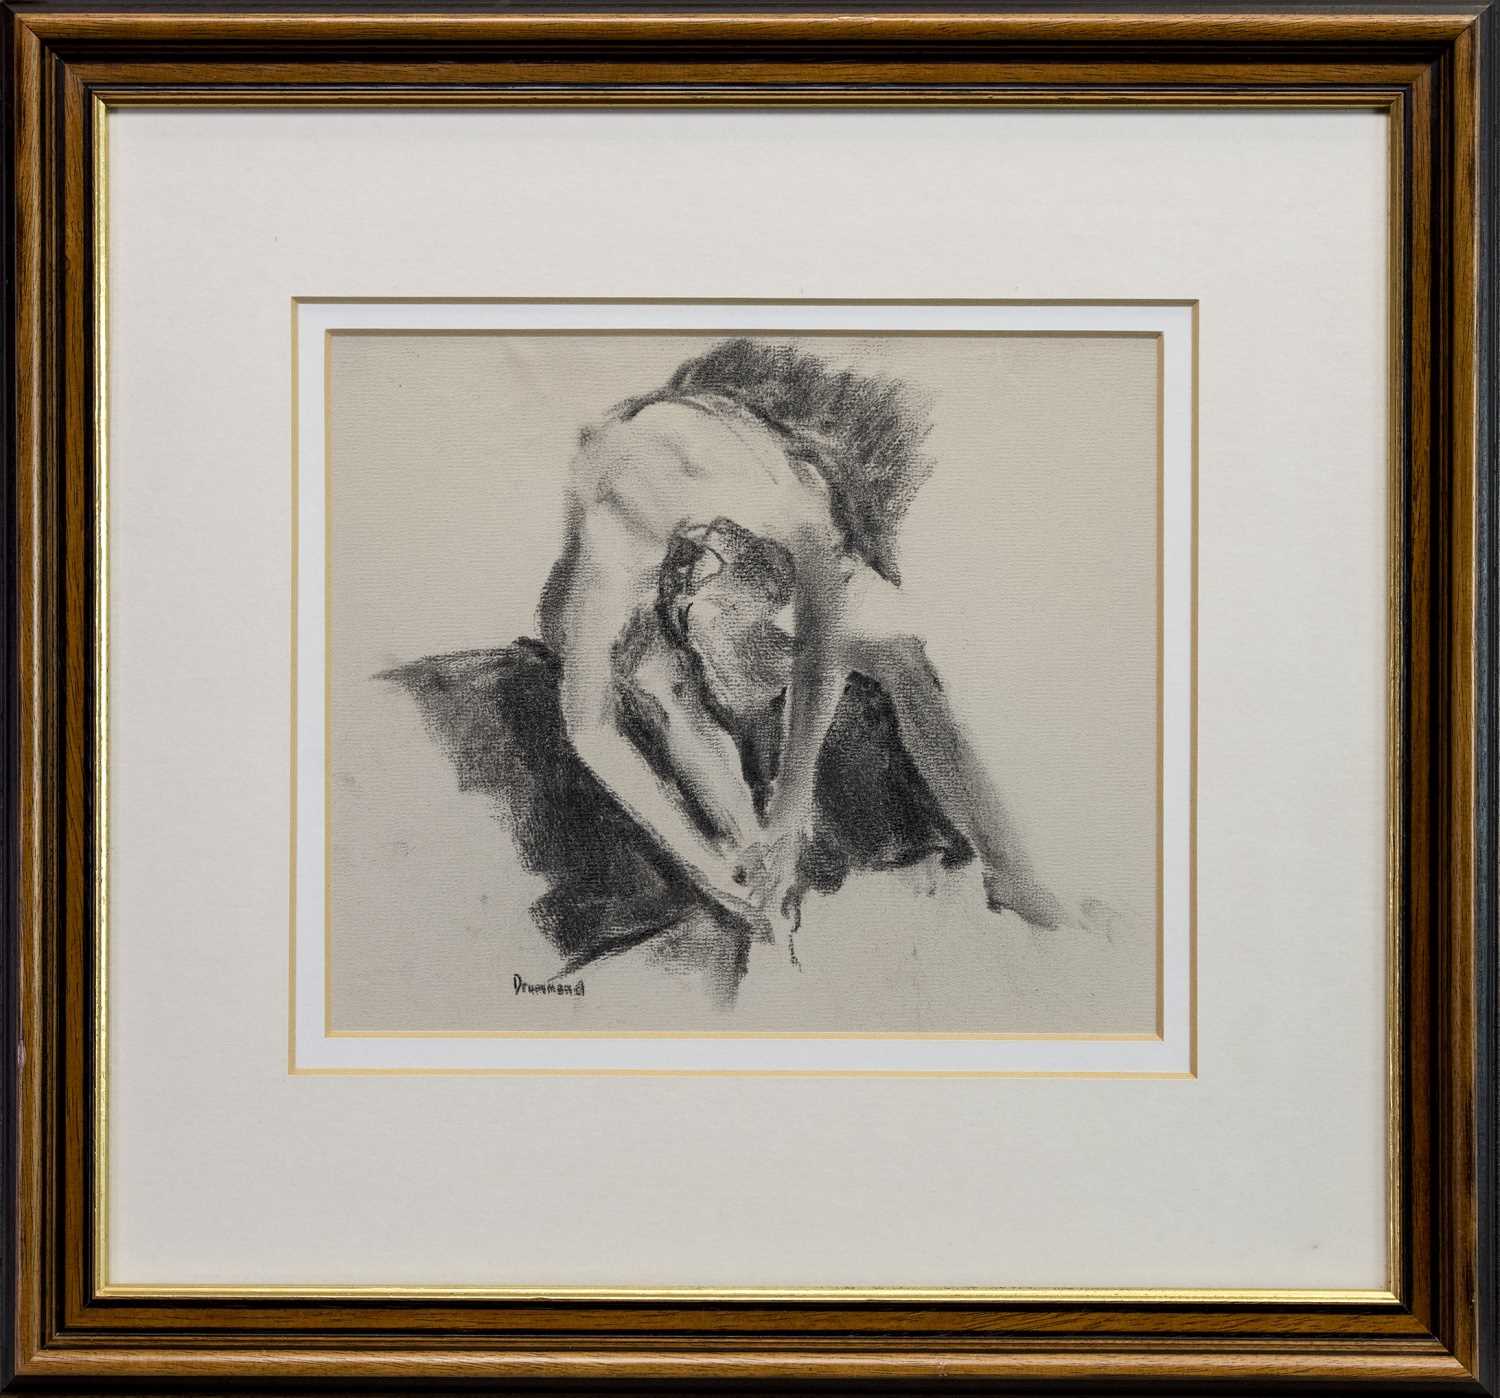 Lot 588 - BALLERINA, A PENCIL DRAWING BY MARION DRUMMOND